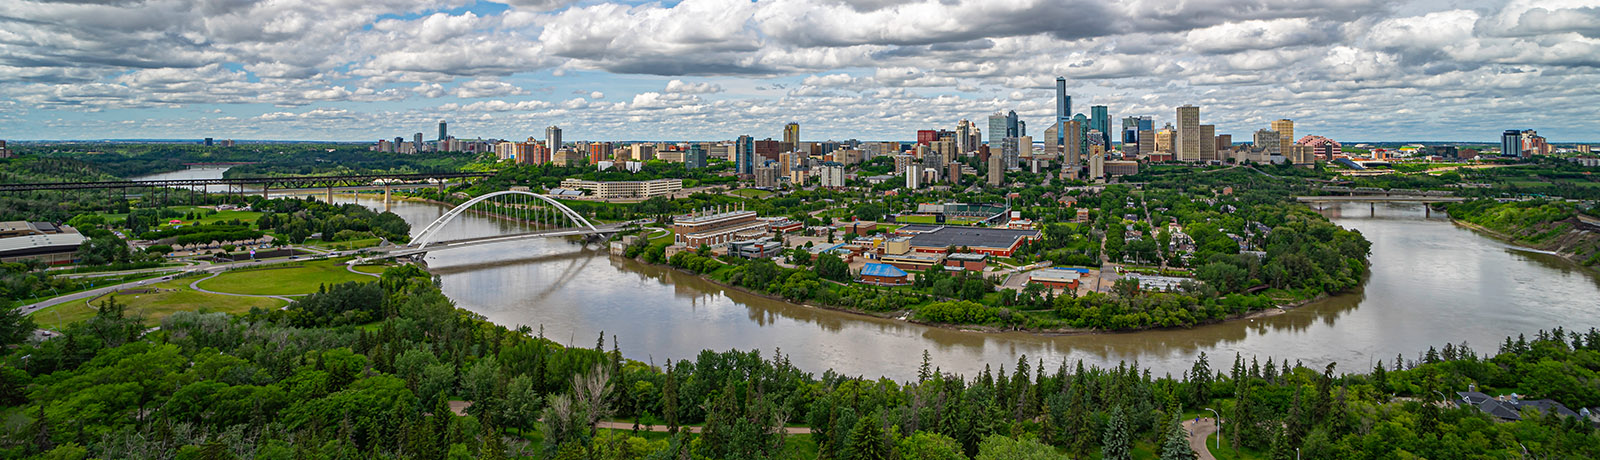 The North Saskatchewan River curves through the landscape with Edmonton's skyline in the background